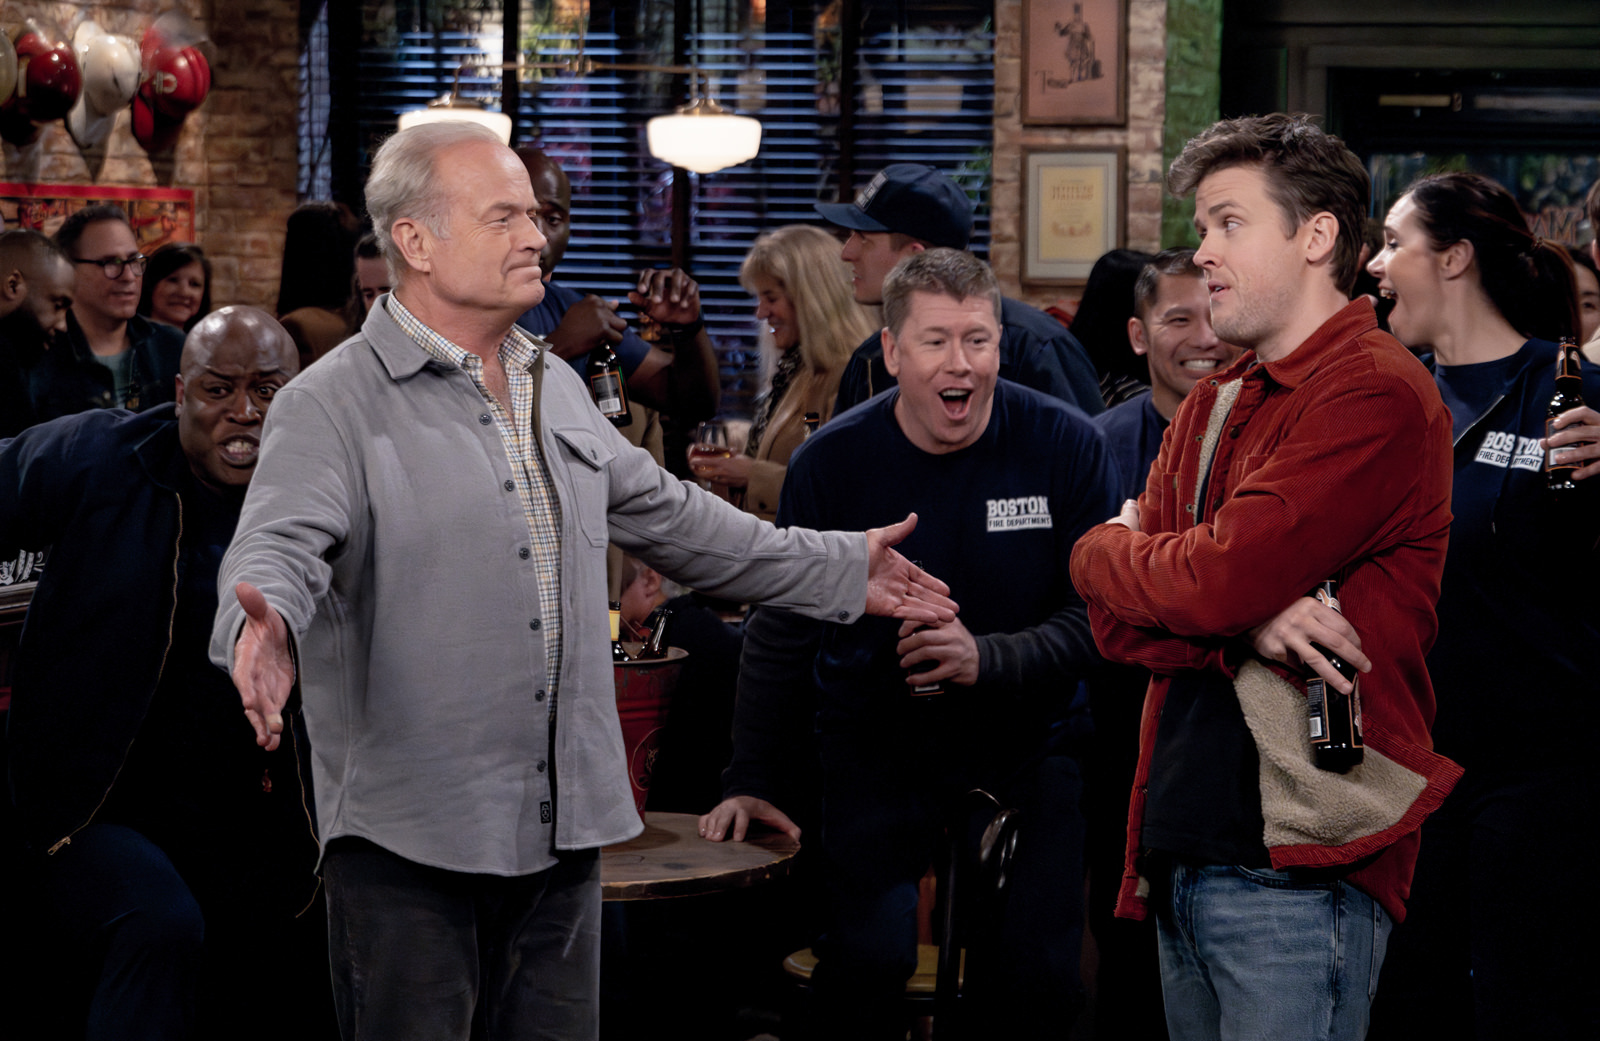 L-R: Kevin Daniels as Tiny, Kelsey Grammer as Frasier Crane, Jimmy Dunn as Moose and Jack Cutmore-Scott as Freddy Crane in Frasier, episode 2, season 1 streaming on Paramount+, 2023.   Photo credit: Chris Haston/Paramount+  TM & © 2023 CBS Studios Inc. Frasier and related marks and logos are trademarks of CBS Studios Inc. All Rights Reserved.